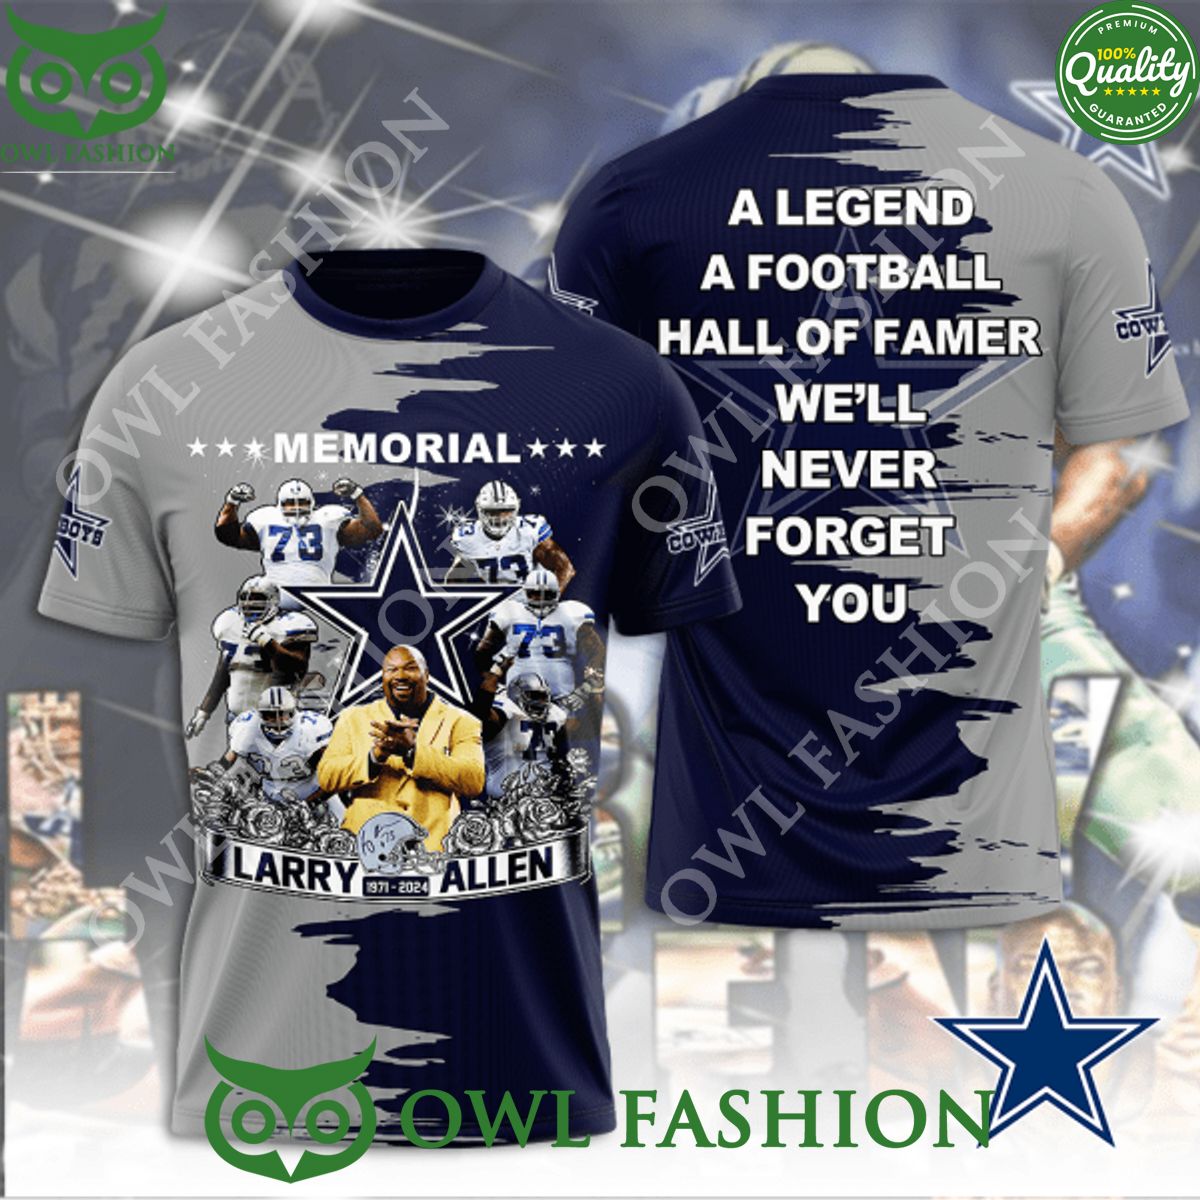 larry allen 1971 2024 a legend of dallas cowboys hall of famer we never forget you t shirt 1 x92tN.jpg